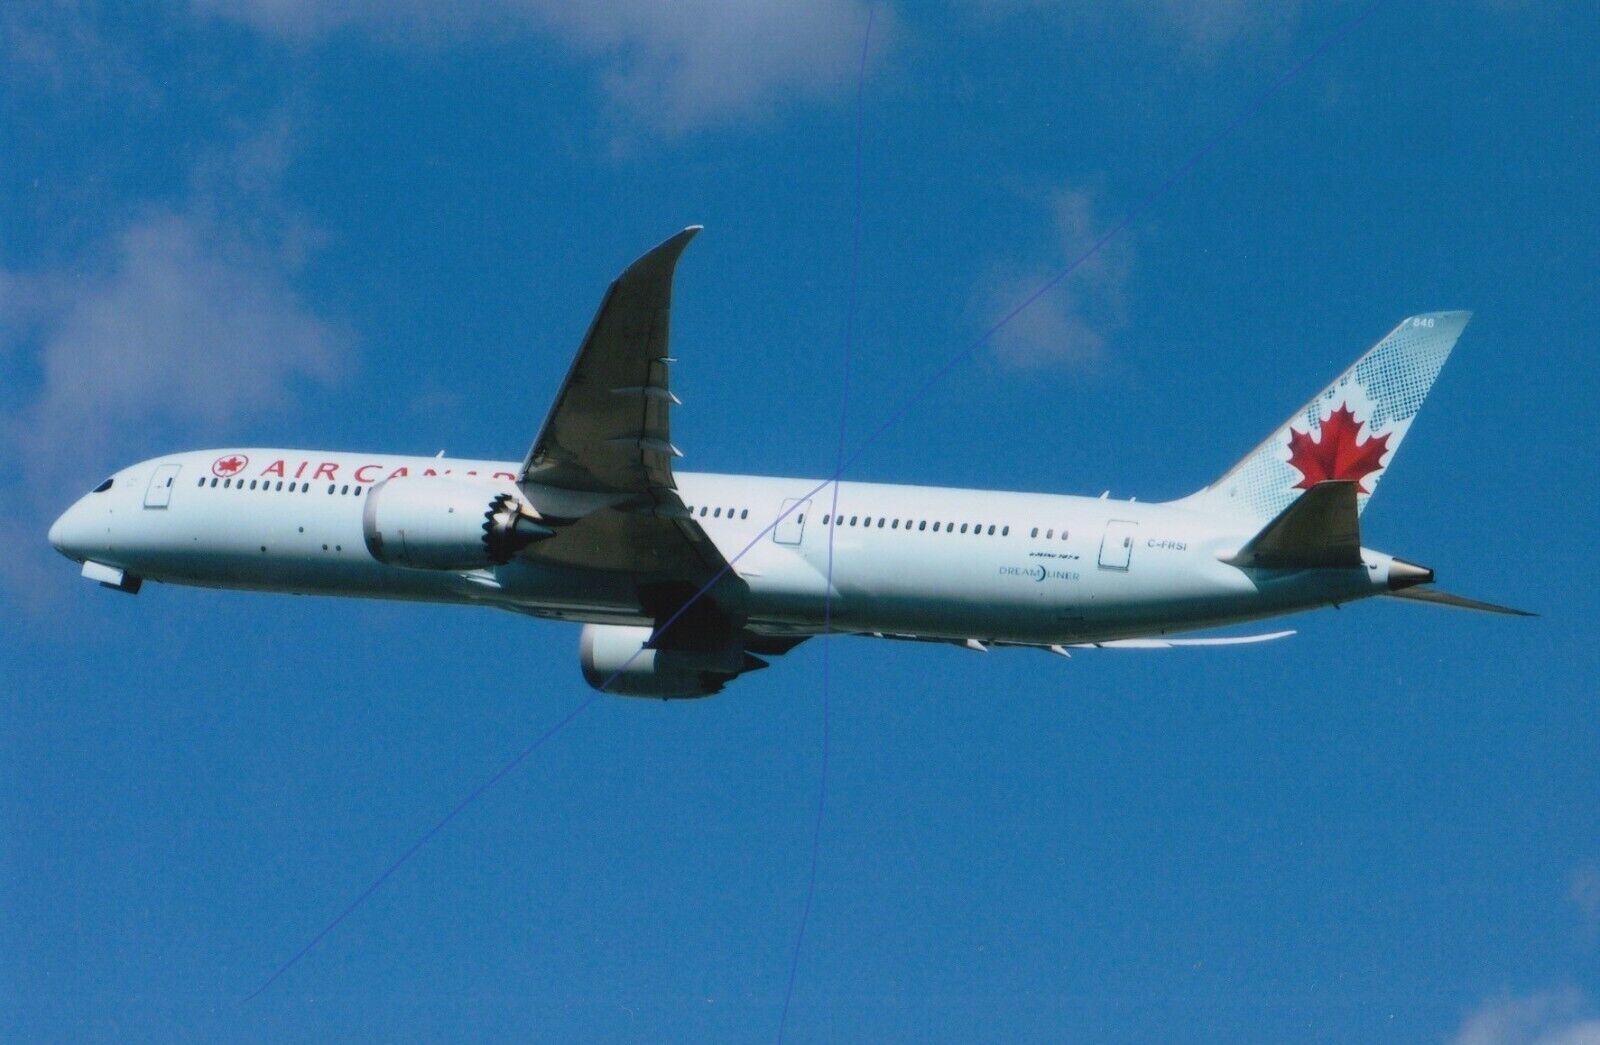 AIRCRAFT PHOTO CIVIL PLANE PICTURE AIR CANADA C-FRSI A BOEING 787 ON PHOTOGRAPH.